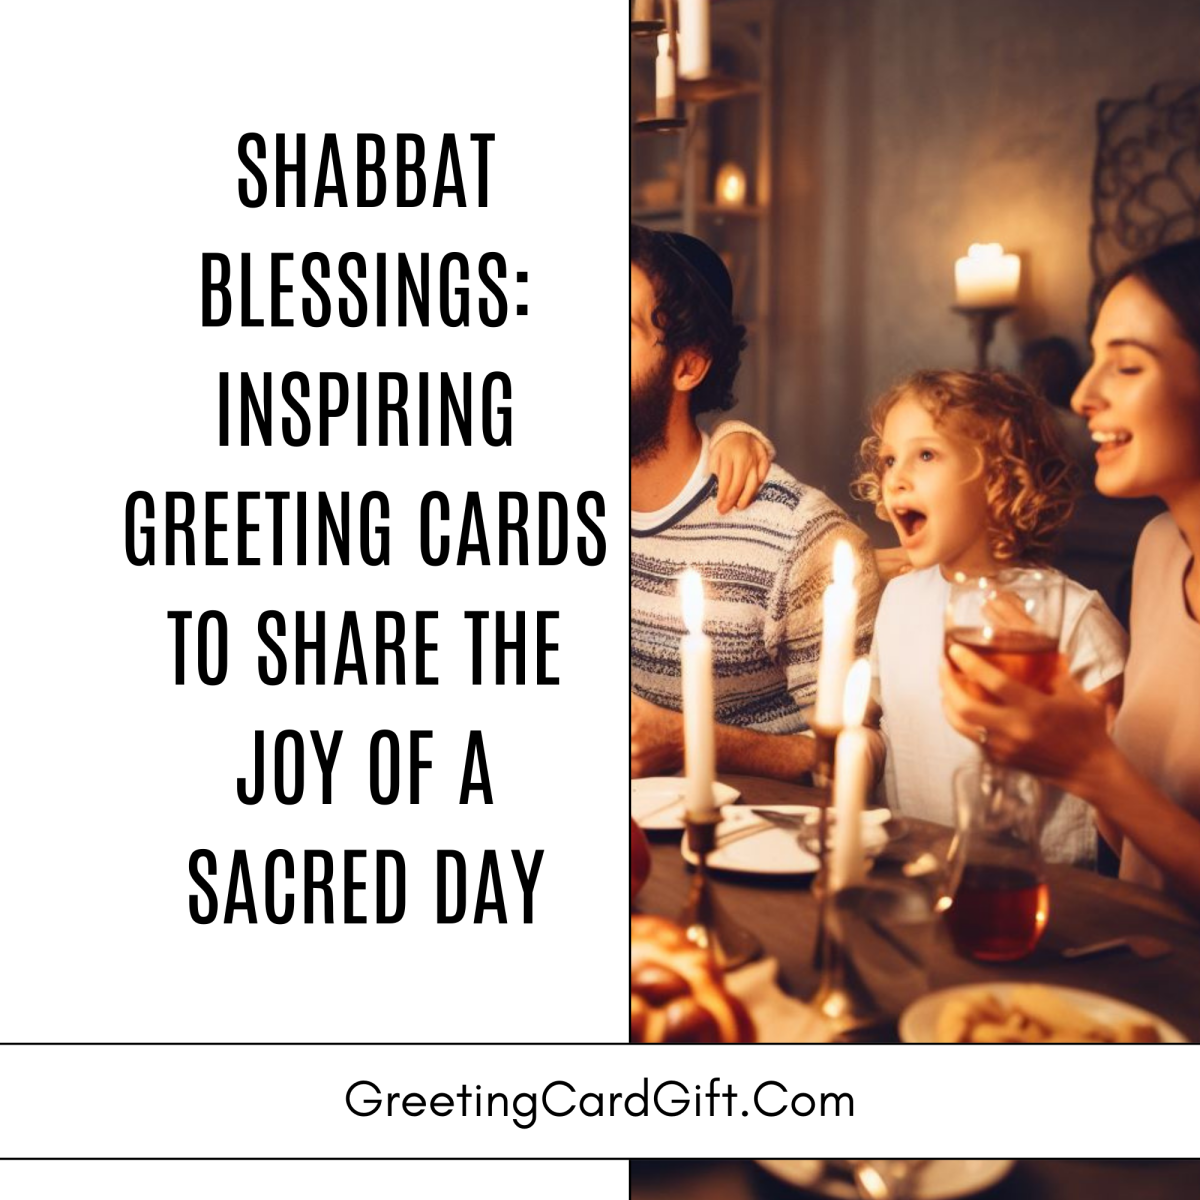 Shabbat Blessings: Inspiring Greeting Cards To Share The Joy Of A Sacred Day